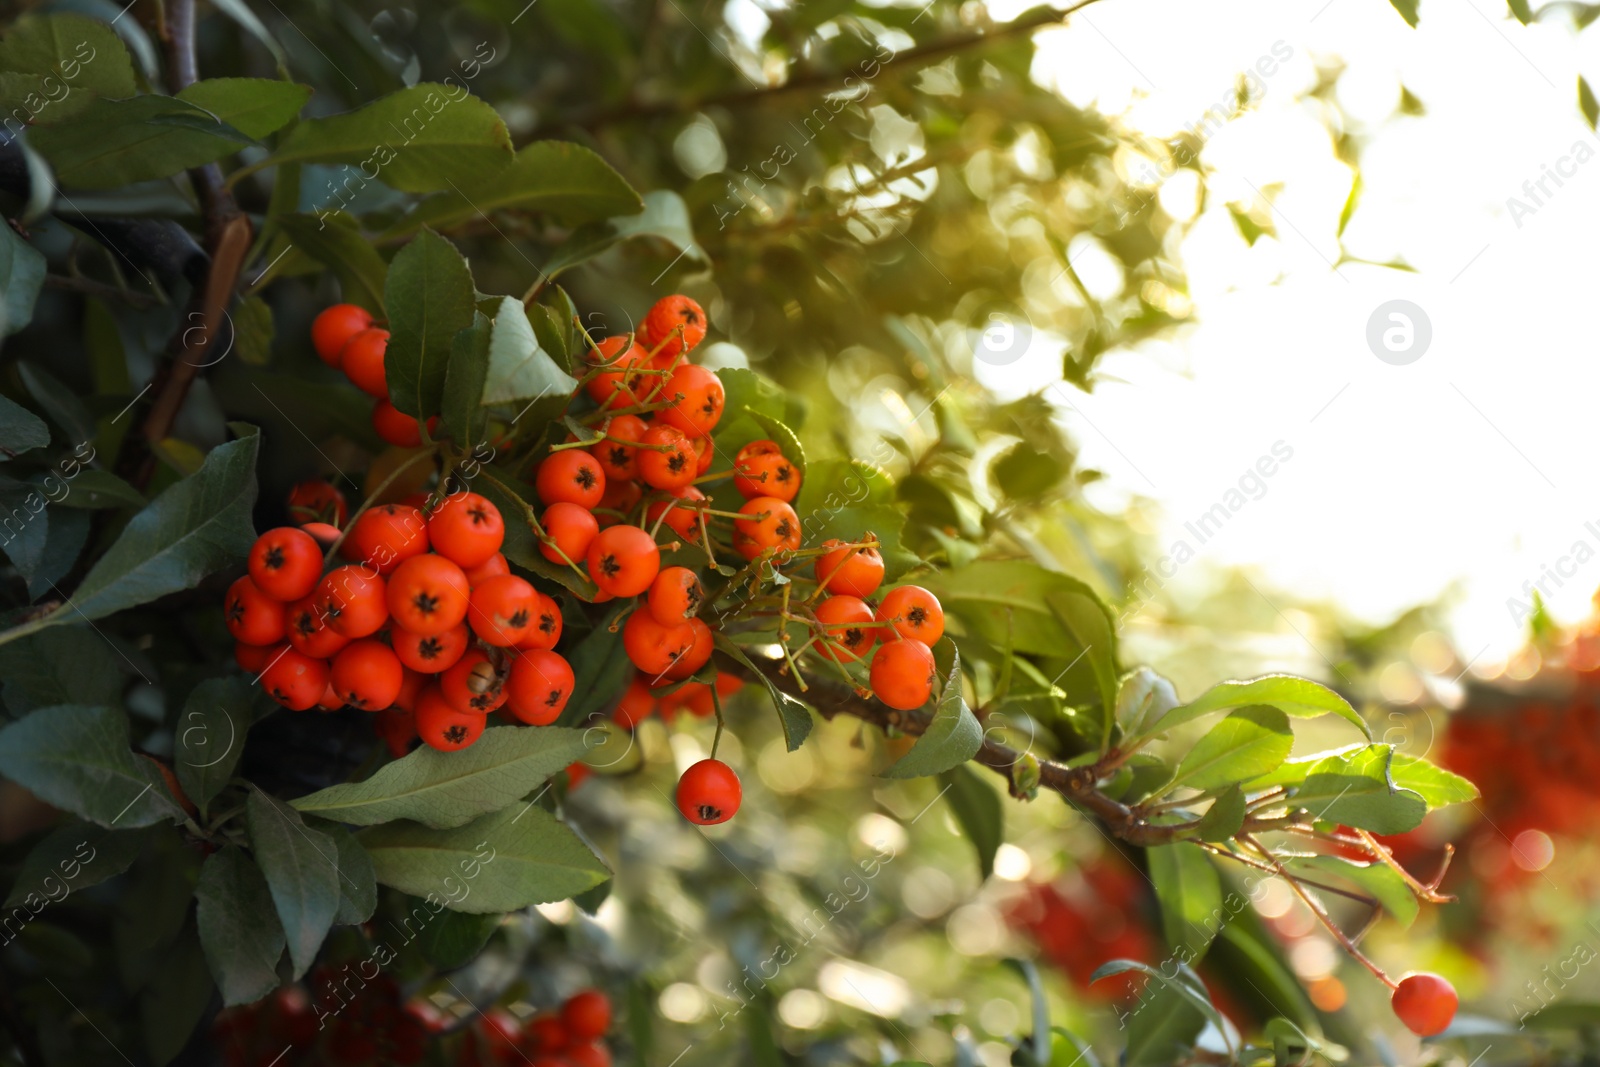 Photo of Bright orange ashberries on tree branch outdoors